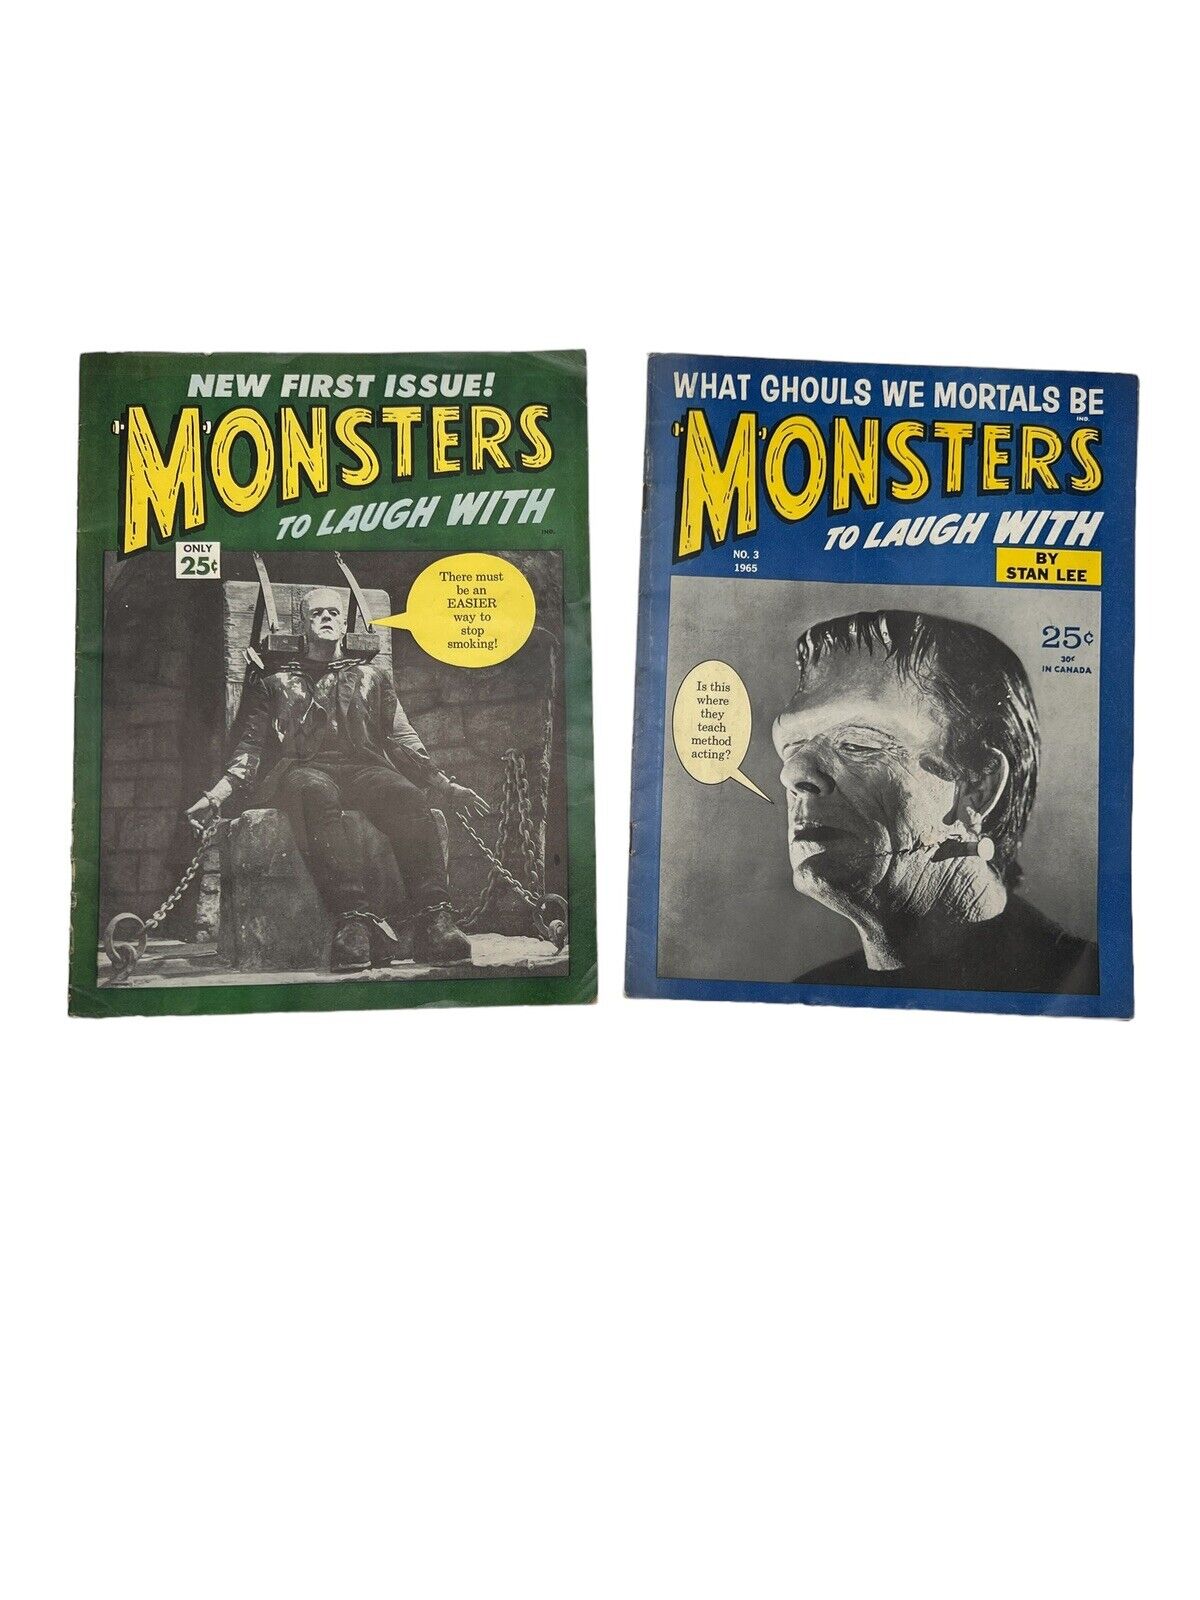 VTG Stan Lee Monsters To Laugh With Magazine First Issue (1964) Issue 3 (1965)